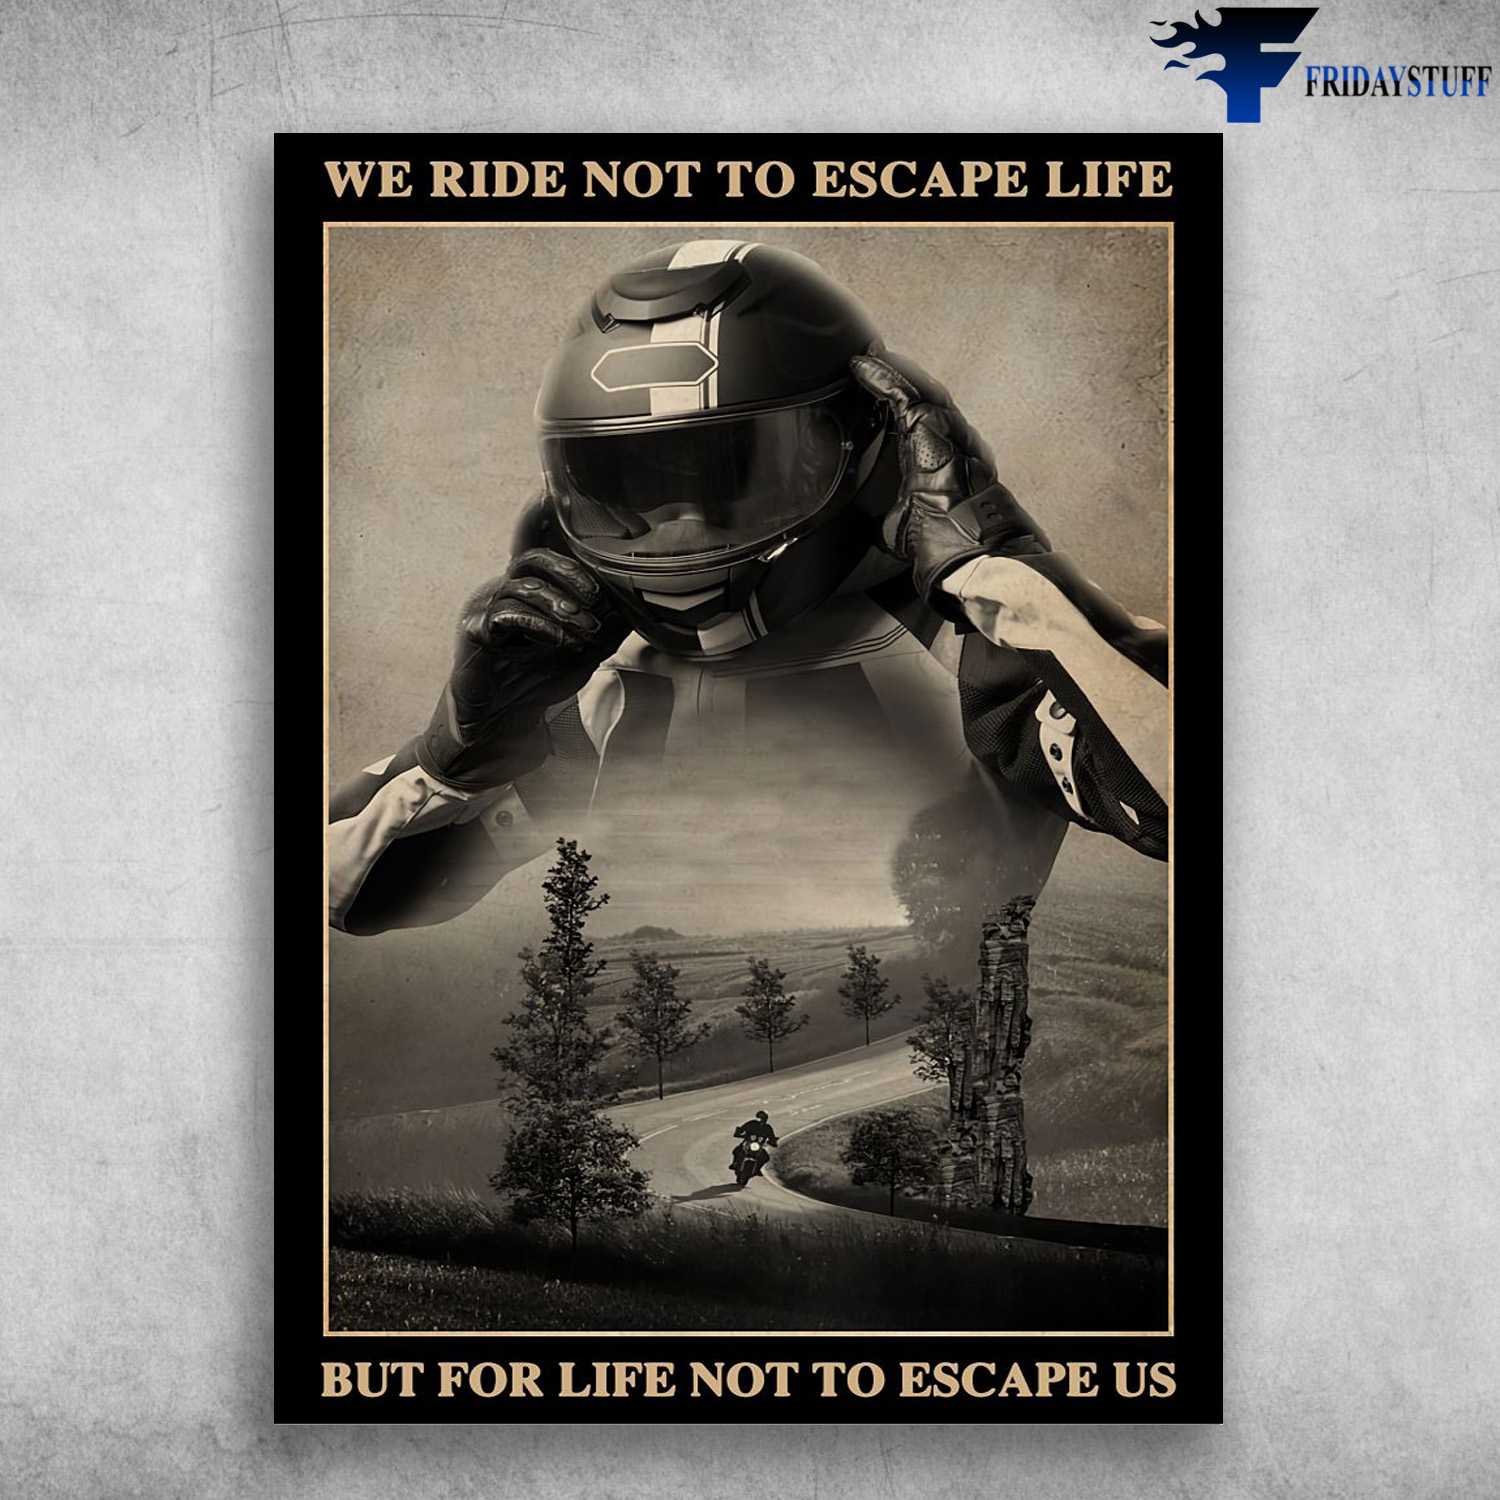 Racing Man, Biker Poster, Motorcycle Riding, We Ride Not To Escape Life, But For Life Not To Escapes Us